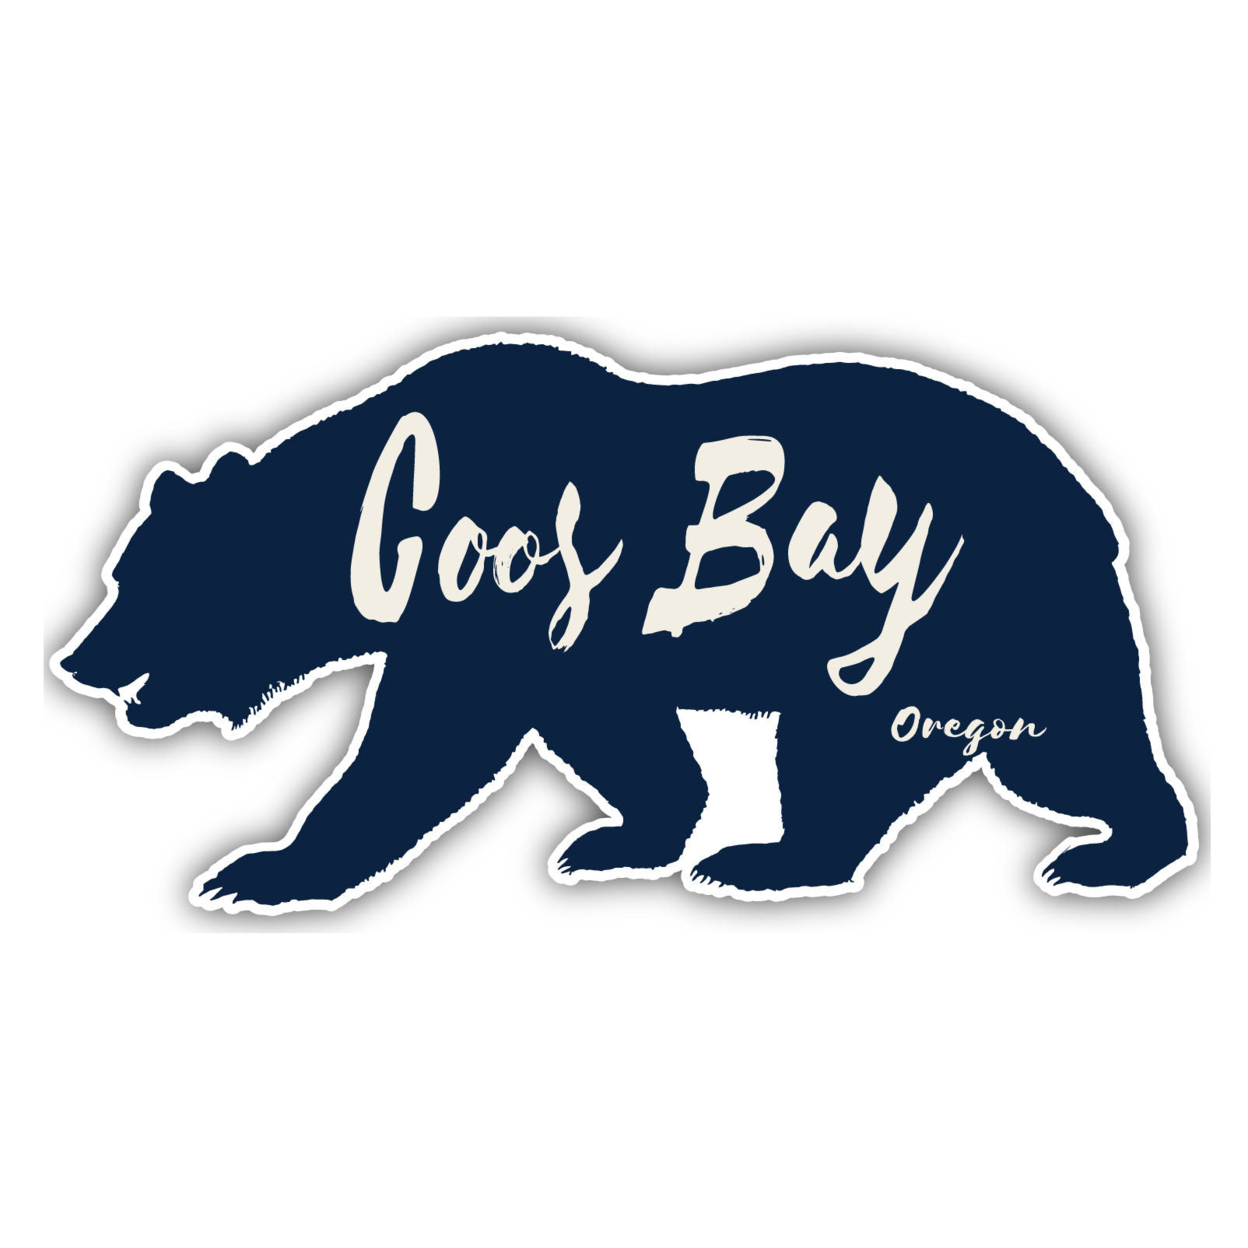 Coos Bay Oregon Souvenir Decorative Stickers (Choose Theme And Size) - 4-Pack, 6-Inch, Bear